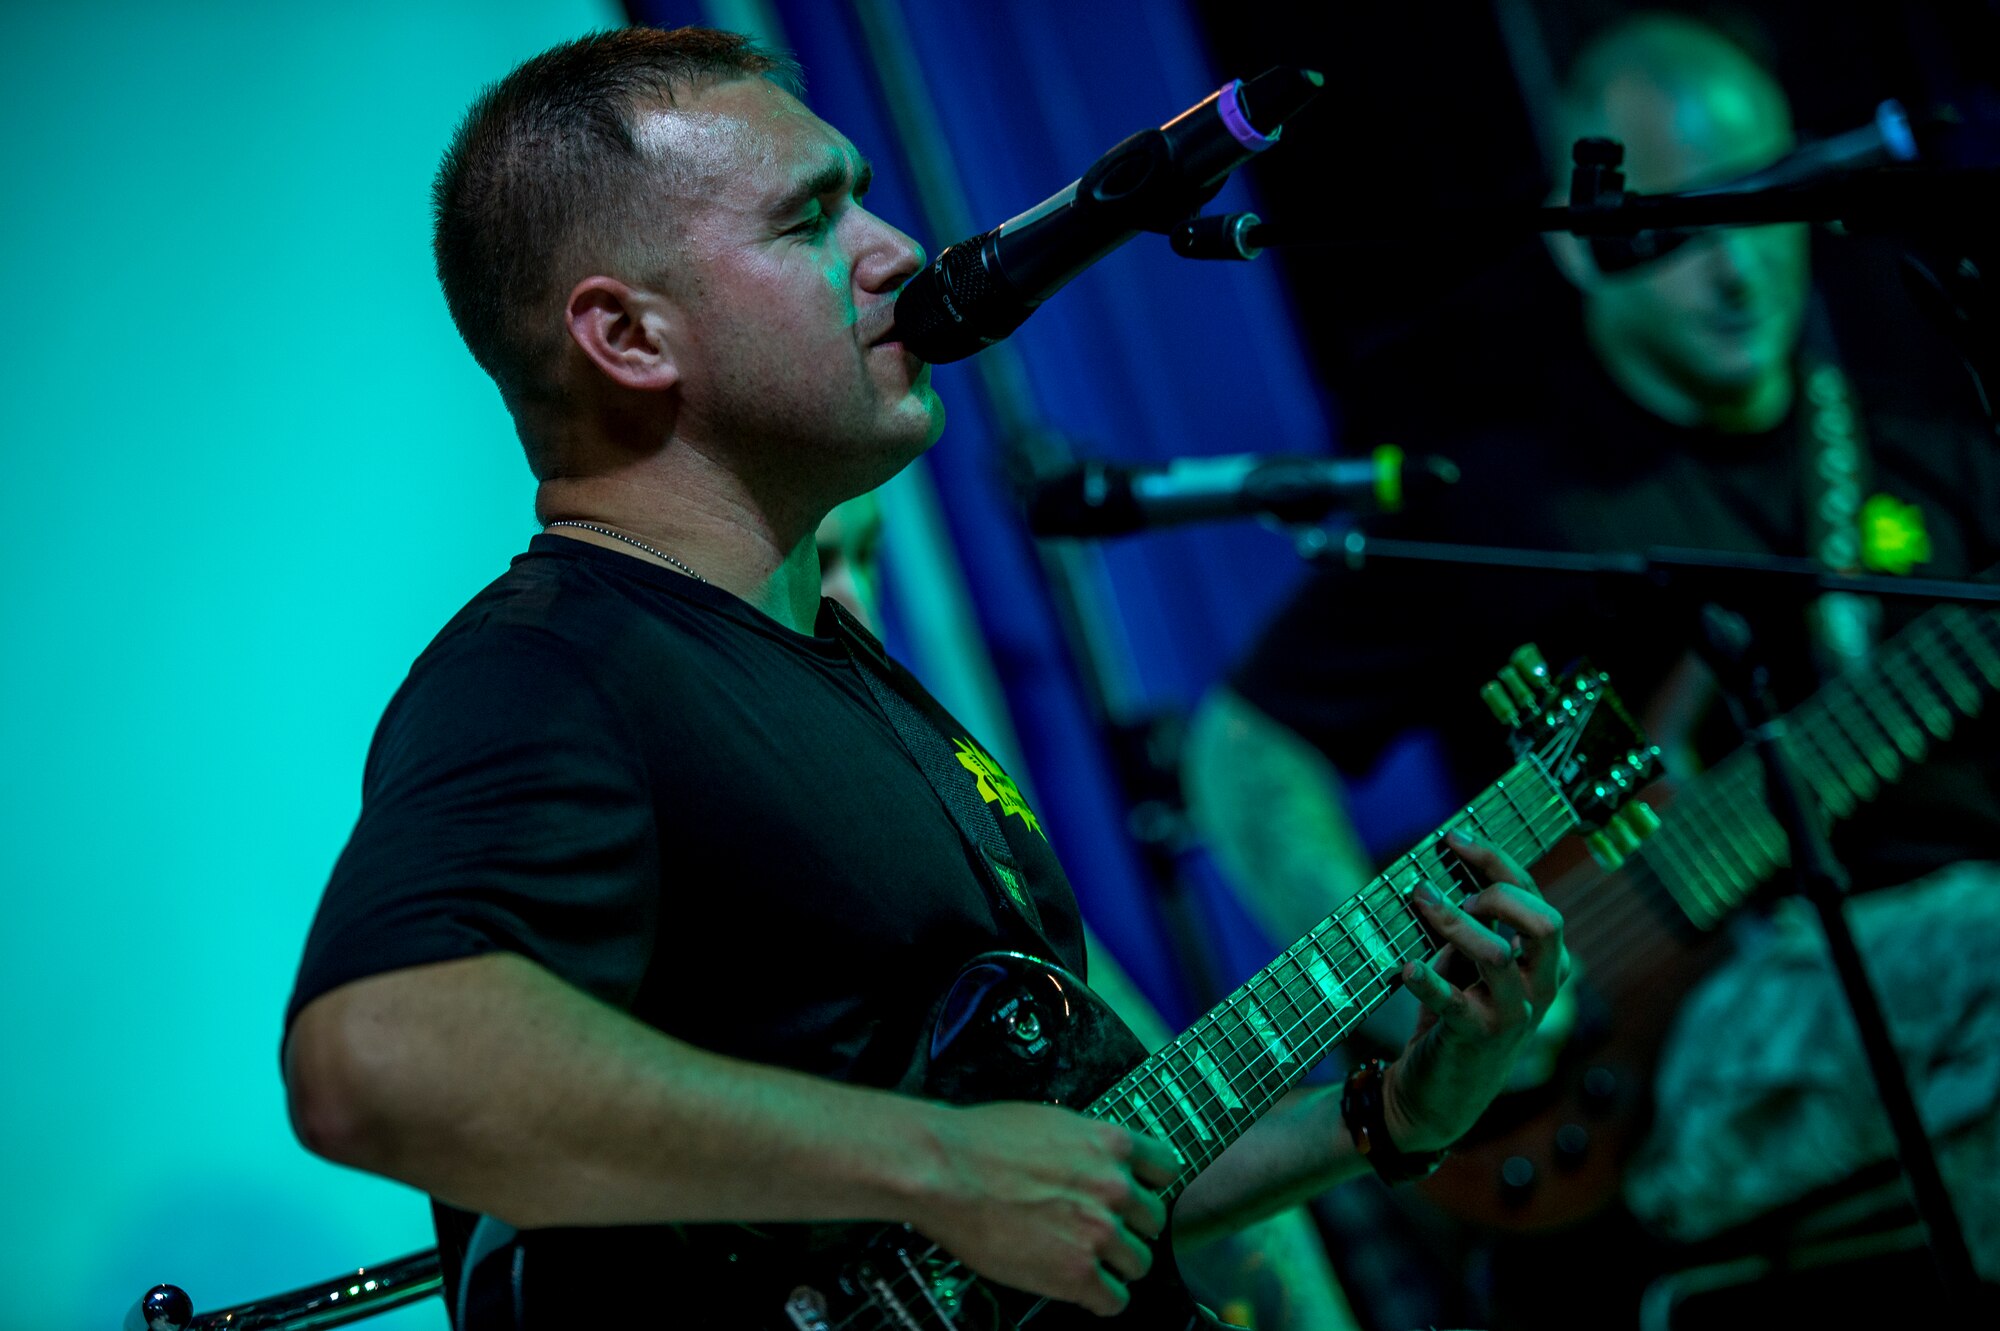 U.S. Army Staff Sgt. Alex Hosay, Loose Cannons guitarist, plays at the Drop Zone June 2, 2014 at an undisclosed location in Southwest Asia. The band deployed from Fort Bragg, North Carolina for a two week tour across the region performing for the troops in support of Operation Enduring Freedom. (U.S. Air Force photo by Staff Sgt. Jeremy Bowcock)